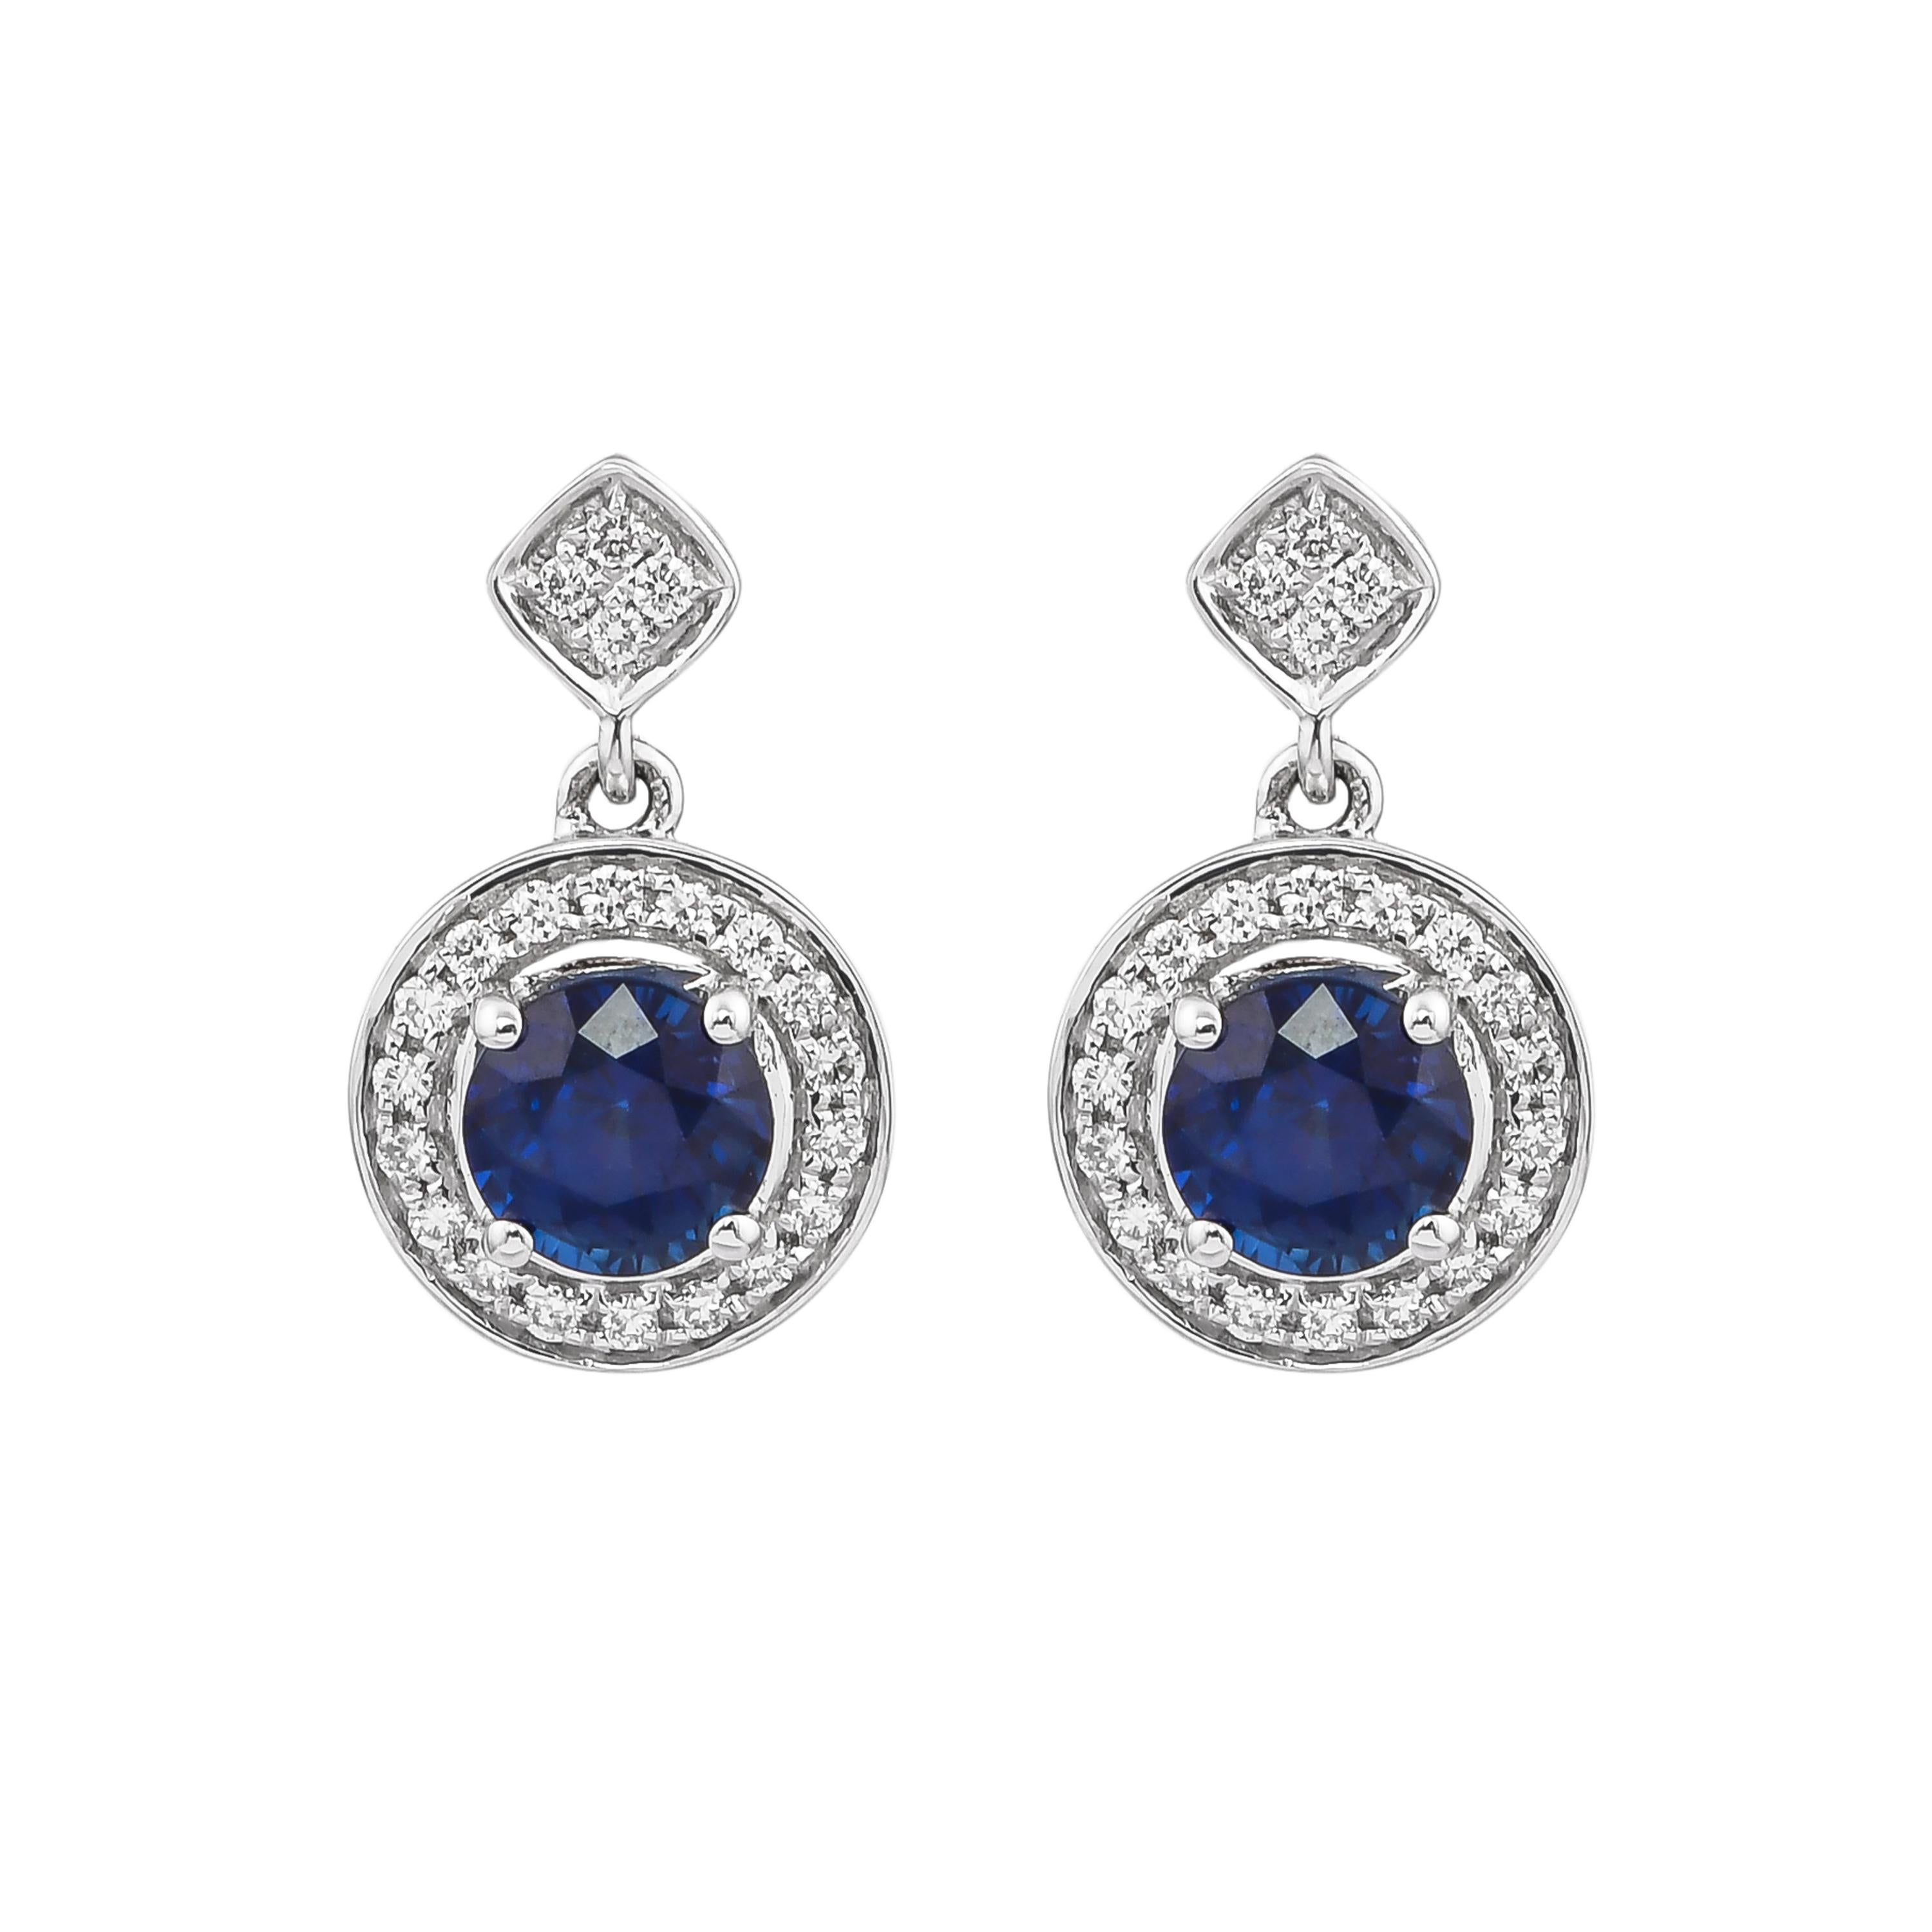 Round Cut 1.1 Carat Blue Sapphire and Diamond Earring in 18 Karat White Gold For Sale